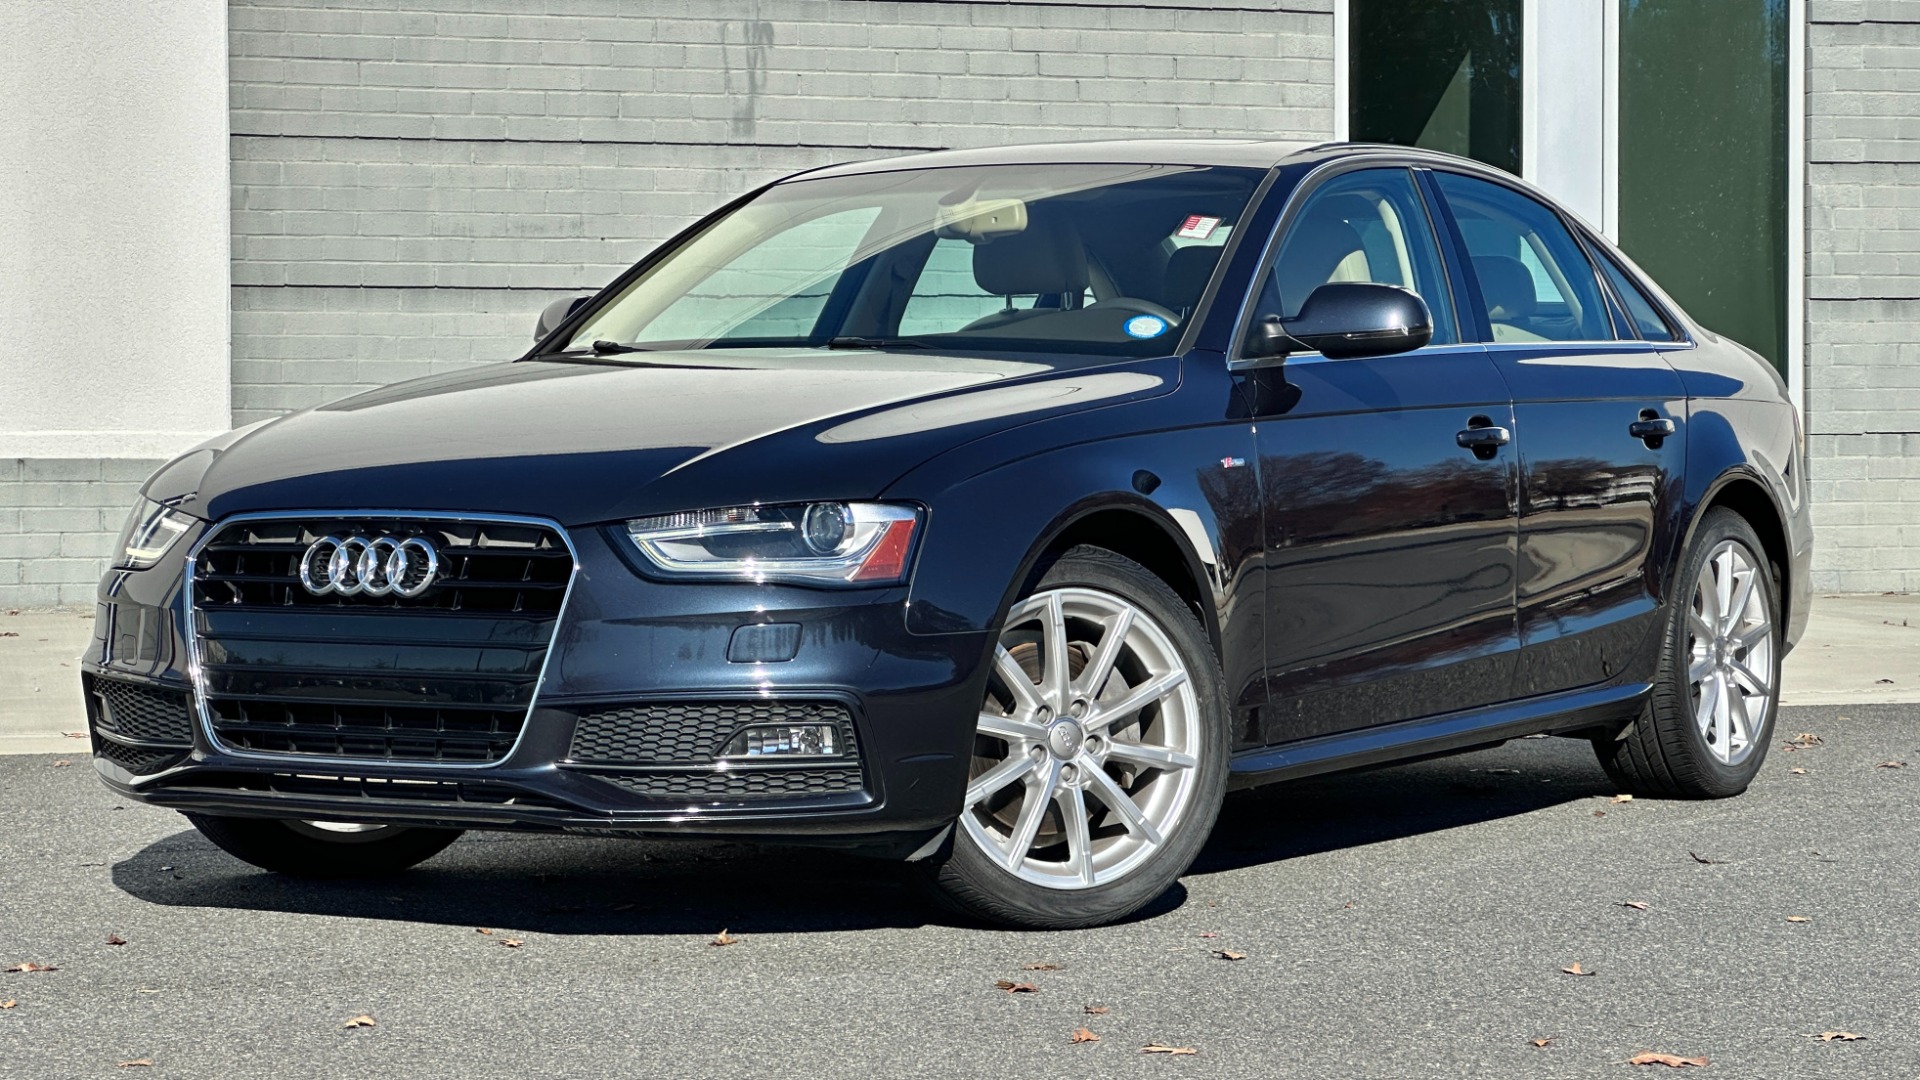 Used 2014 Audi A4 PREMIUM PLUS / NAVIGATION PLUS / BLINDSPOT ASSIST / LEATHER / SUNROOF for sale $21,900 at Formula Imports in Charlotte NC 28227 1